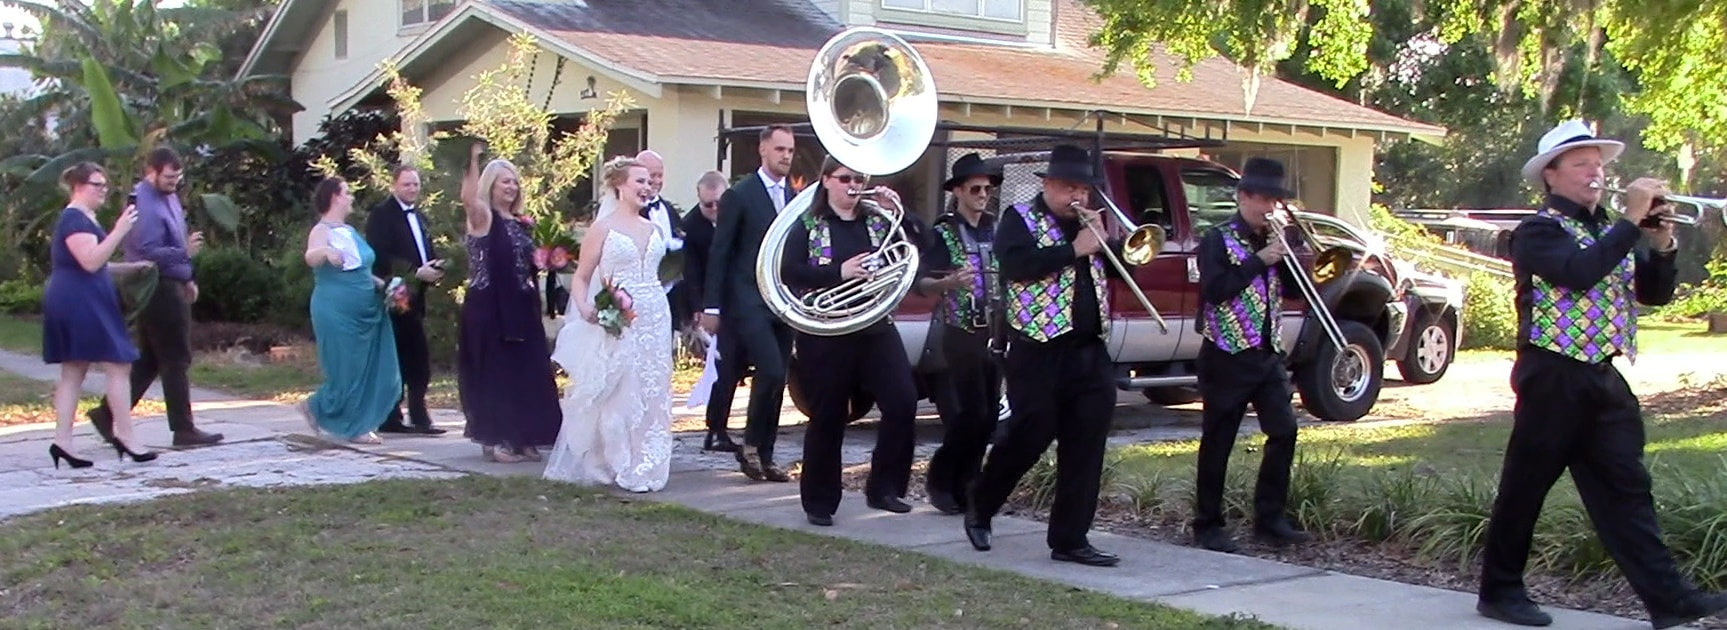 Real Deal Brass Band, Second Line Band for wedding, Marco Island, Napes, Ft. Myers, Venice, Florida. 